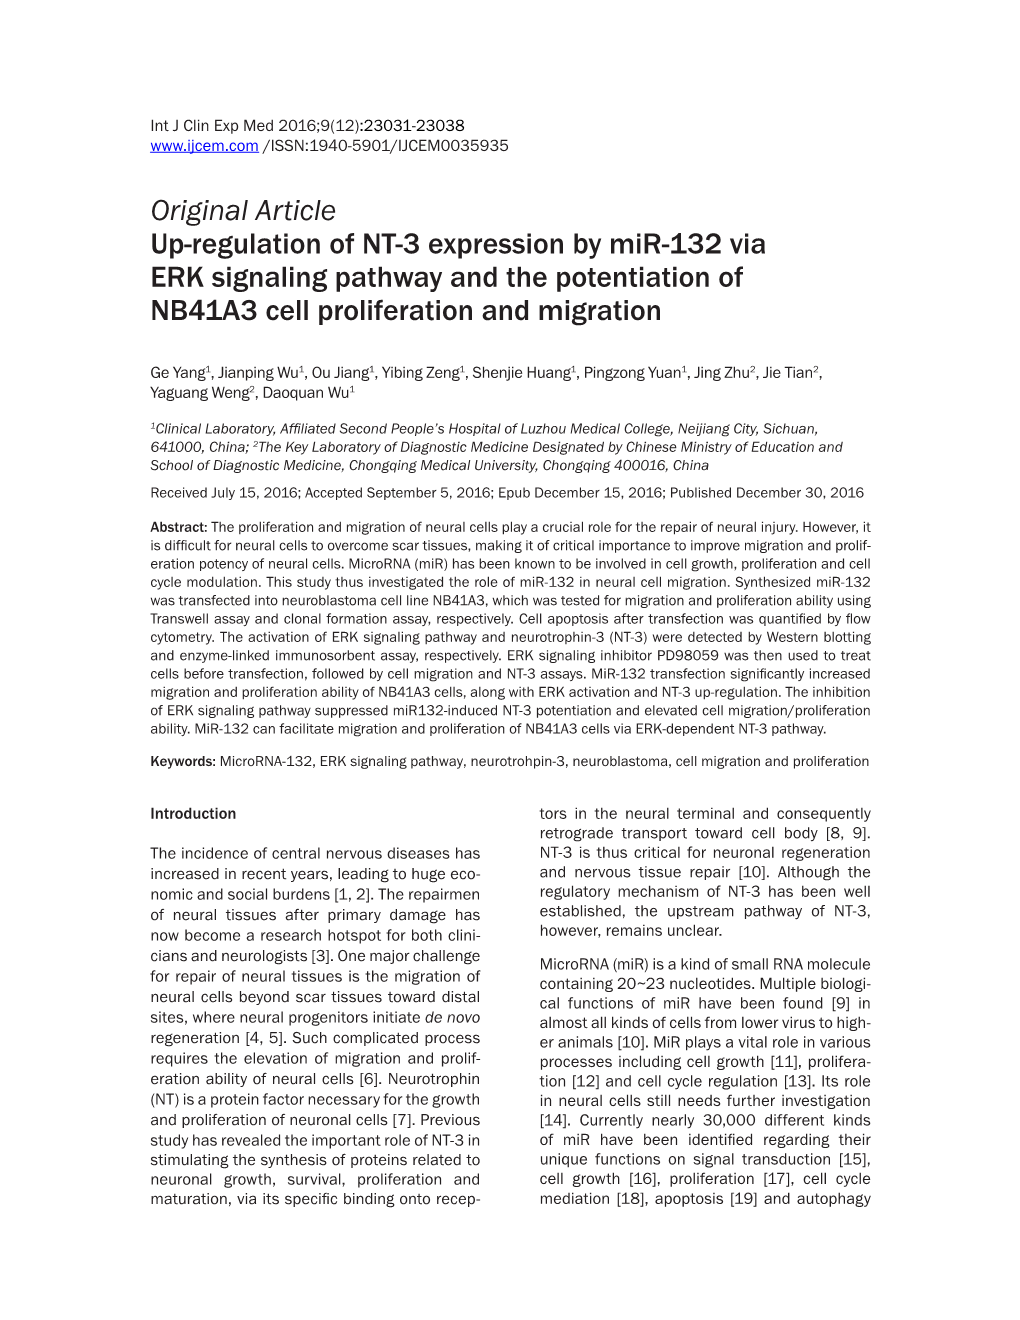 Original Article Up-Regulation of NT-3 Expression by Mir-132 Via ERK Signaling Pathway and the Potentiation of NB41A3 Cell Proliferation and Migration